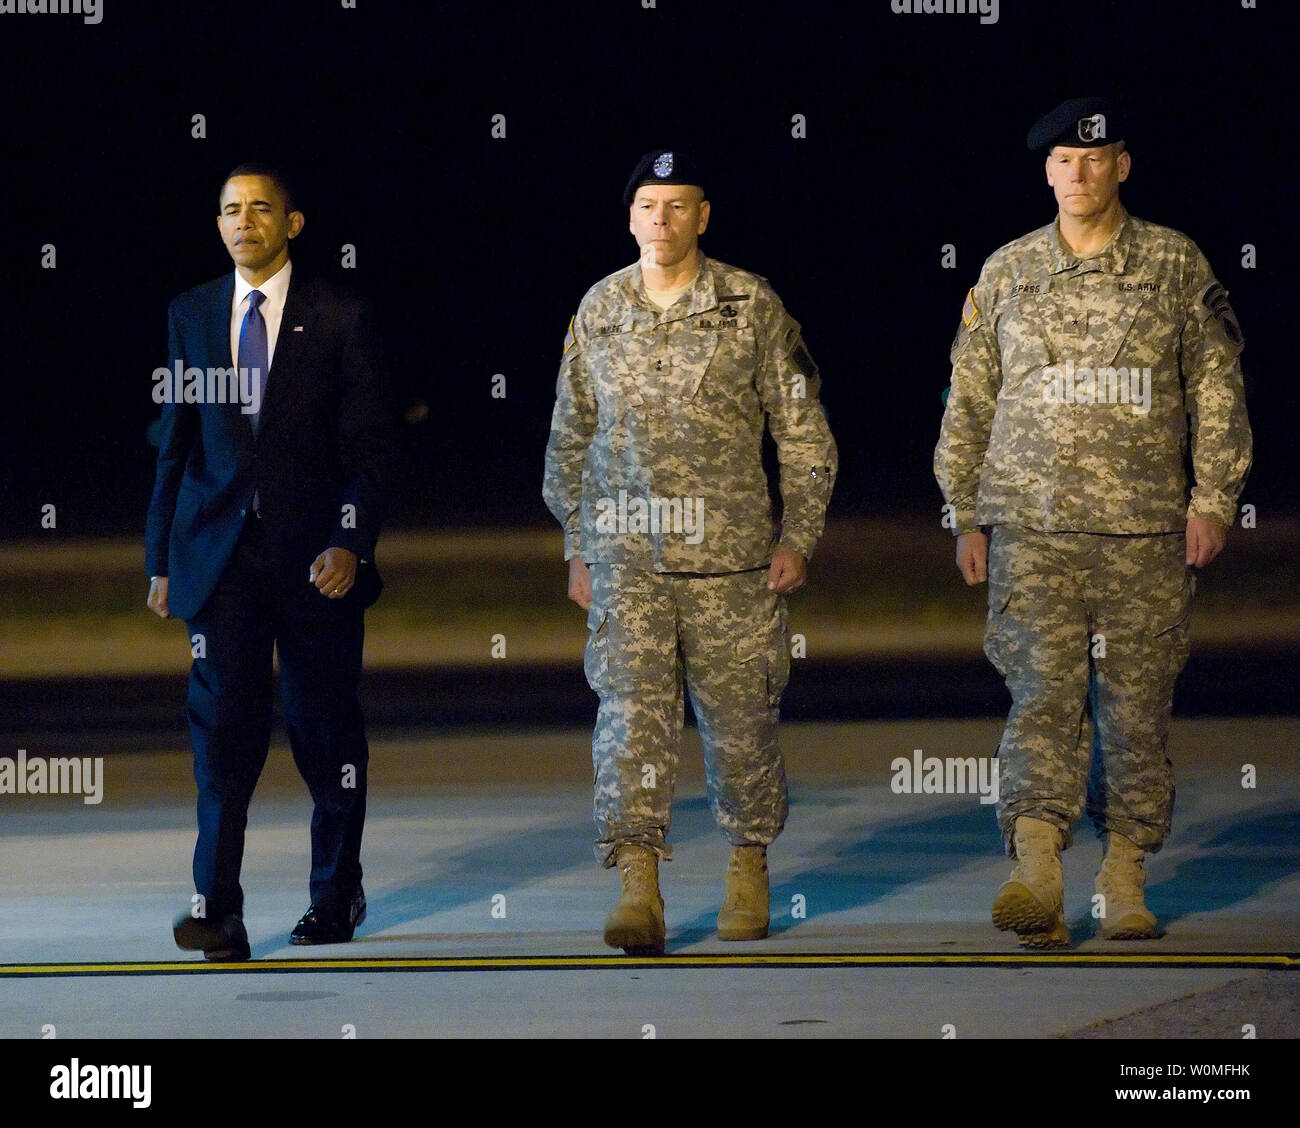 U.S. President Barack Obama, Army Maj. Gen. Daniel V. Wright, and Army Brig. Gen. Michael S. Repass depart the flight line during the dignified transfer of Army Sgt. Dale R. Griffin of Terre Haute, Ind., at Dover Air Force Base, Delaware on October 29, 2009. Griffin, who was assigned to 1st Battalion, 17th Infantry Regiment, 5th Stryker Brigade Combat Team, 2nd Infantry Division, was killed in action on October 27, 2009, by a roadside bomb in the Kandahar province of Afghanistan. UPI/Jason Minto/U.S. Air Force Stock Photo